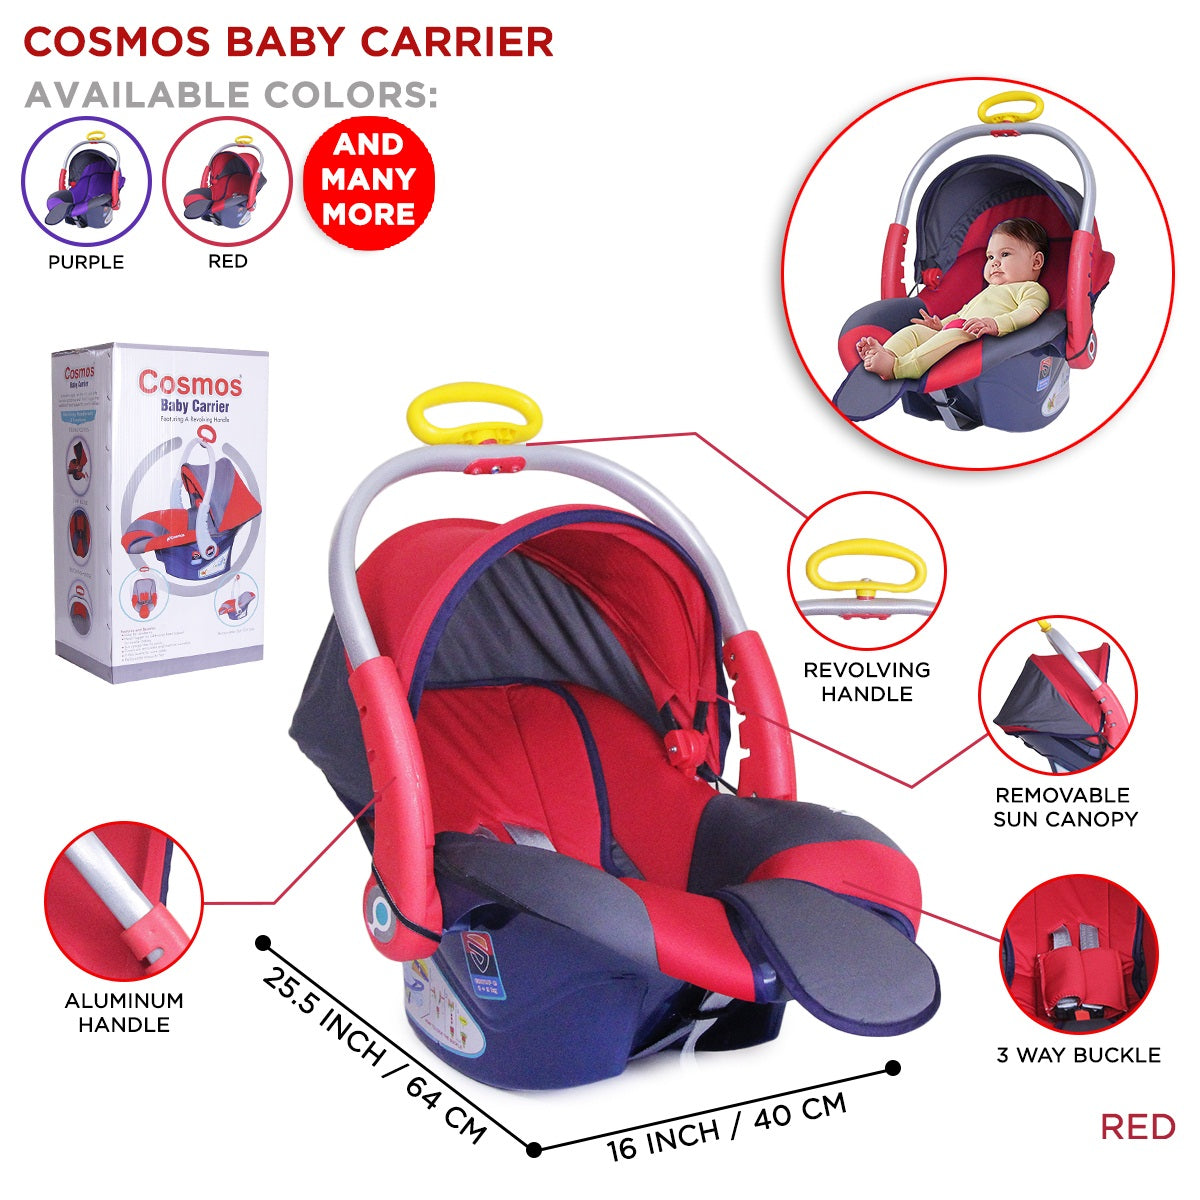 Doll Carrier Cosmos